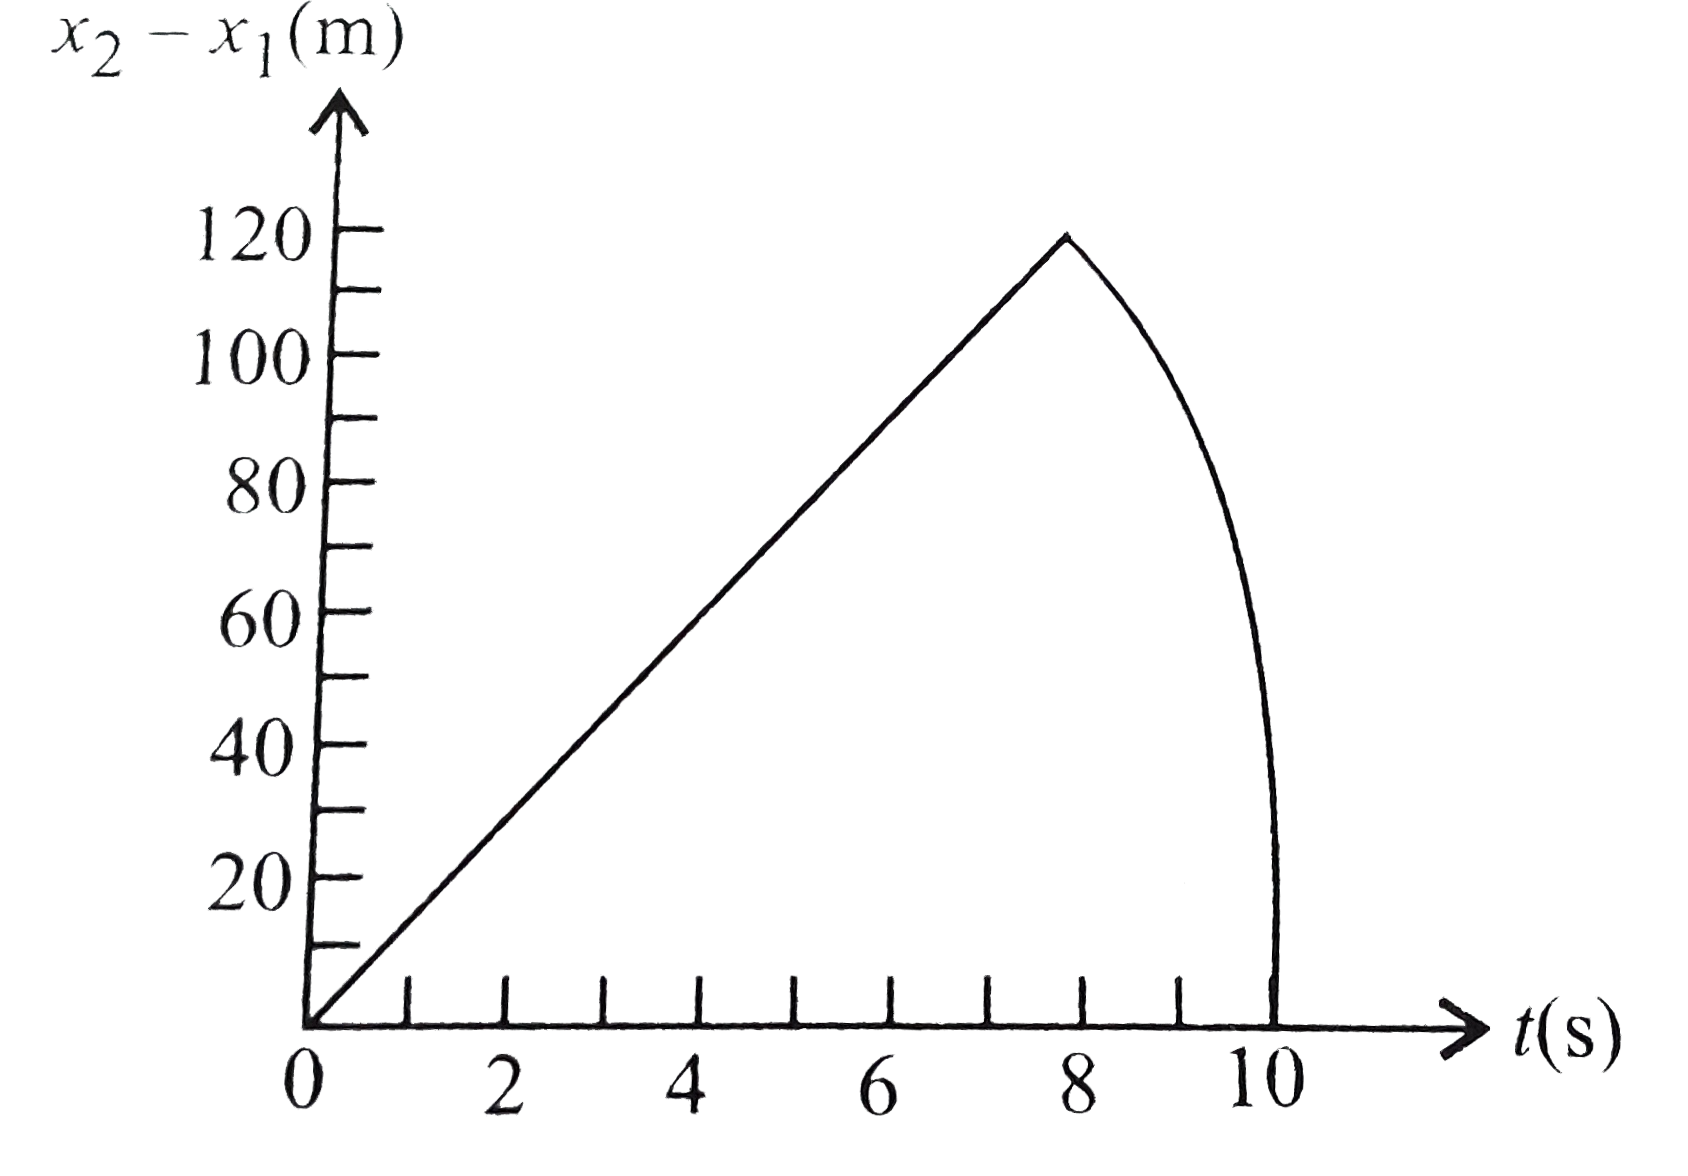 Two stones are thrown up simultaneously from the edge of a cliff 200 m high with initial speeds of 15 m s^(-1) and 30 m s^(-1) respectively. The time variation of the relative position of the second stone will request to the first as shown in the figure. The equation of the linear part is